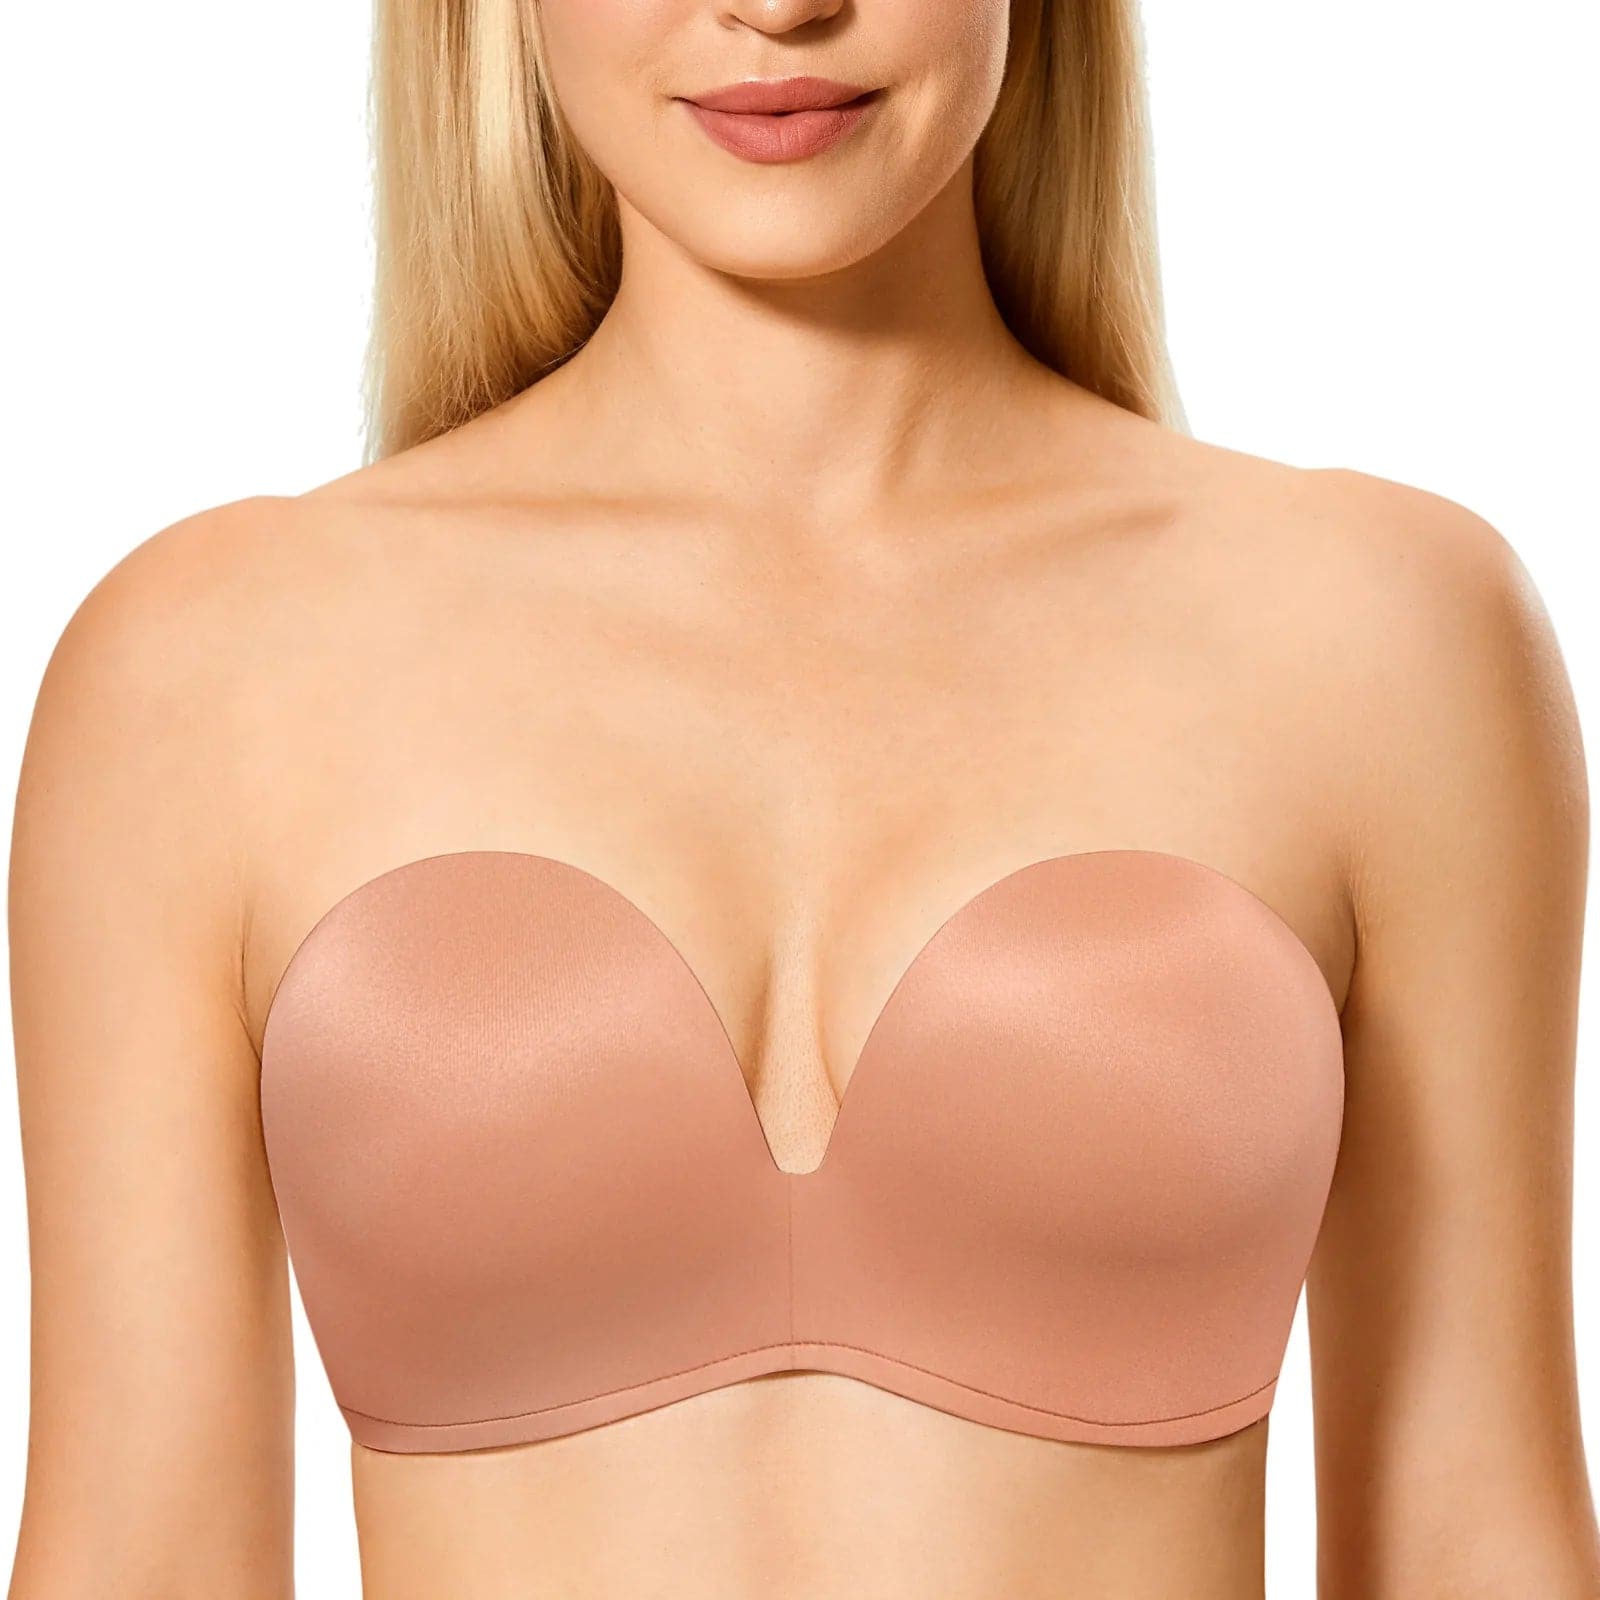 Silicone Strapless Bra with Underwire - Push Up, Plunge, Padded - Wandering Woman